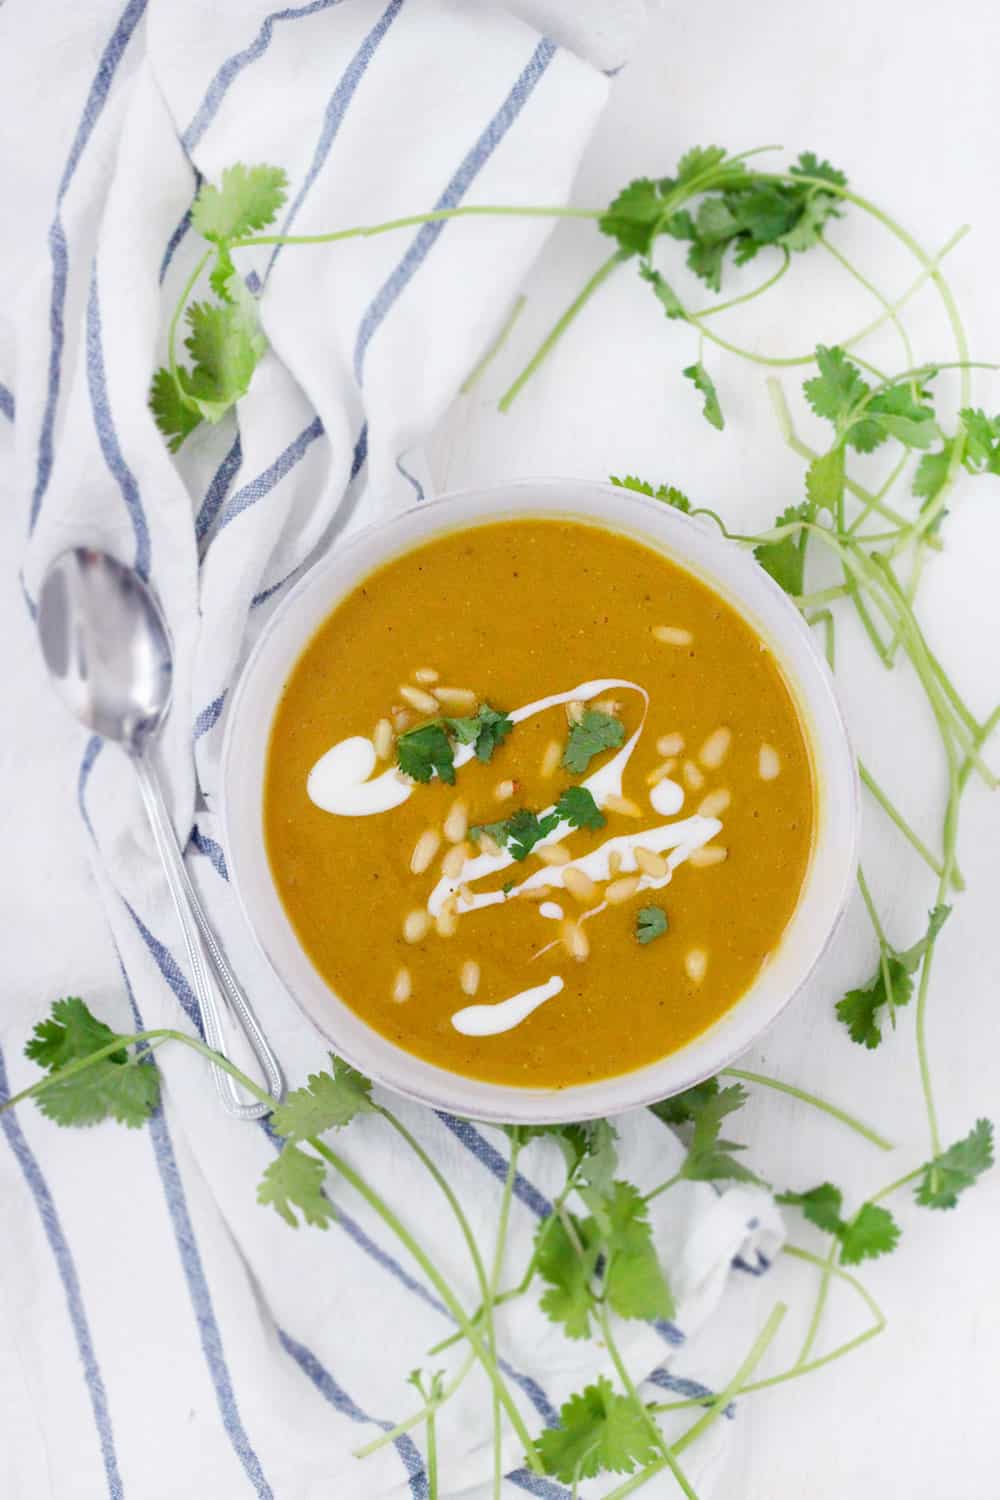 This vegan, nutrient-packed Butternut Squash and Red Lentil Soup recipe is easy, delicious, and packed with fiber, protein, and vitamins. Turmeric adds a warm, peppery flavor as well as immune-boosting properties.